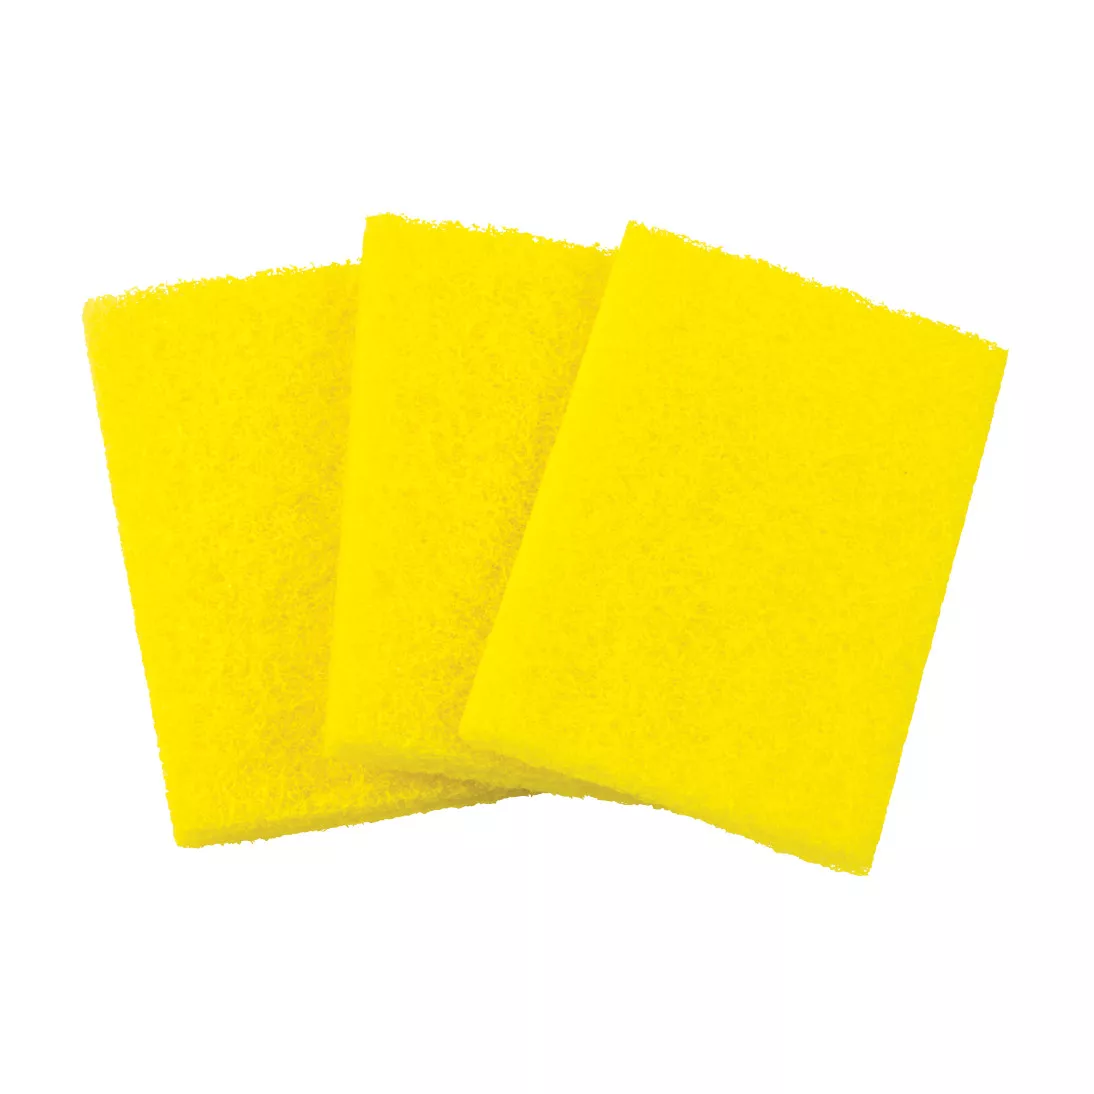 3M™ Restroom Cleaning Pad 35-YLW, Yellow, 3 in x 5 in x 0.4 in, 60/Case,
Restricted